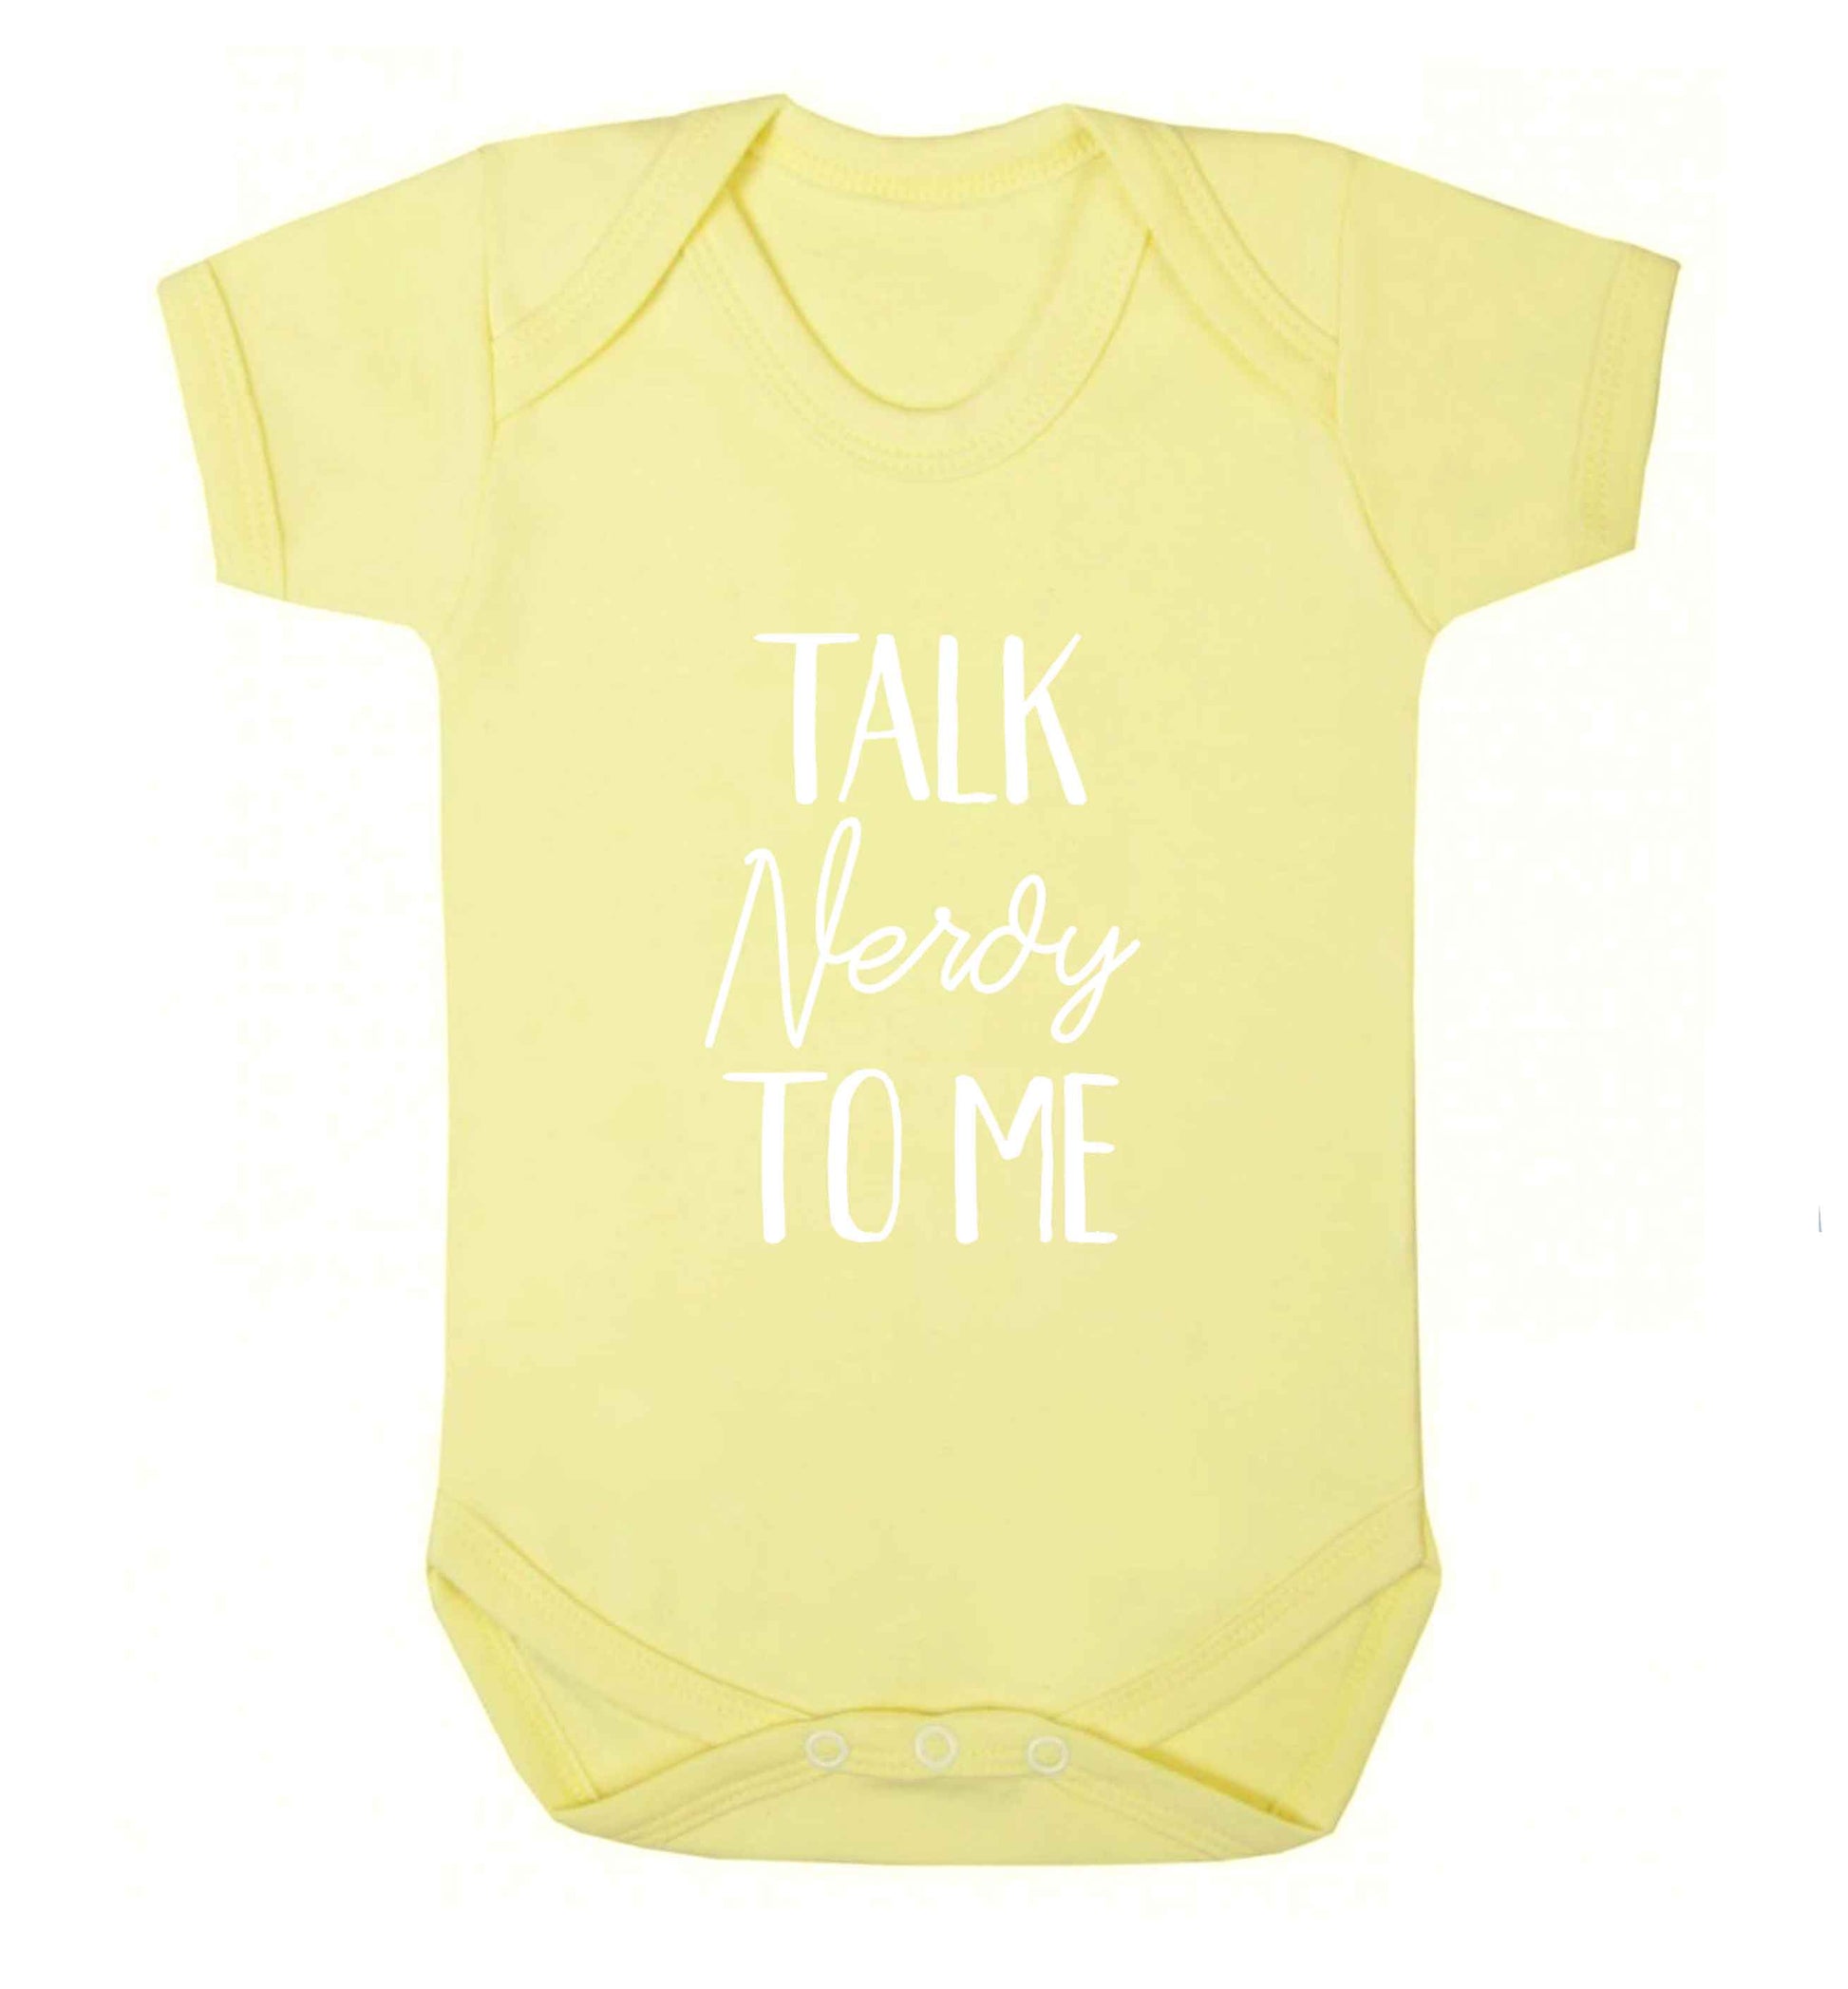 Talk nerdy to me baby vest pale yellow 18-24 months